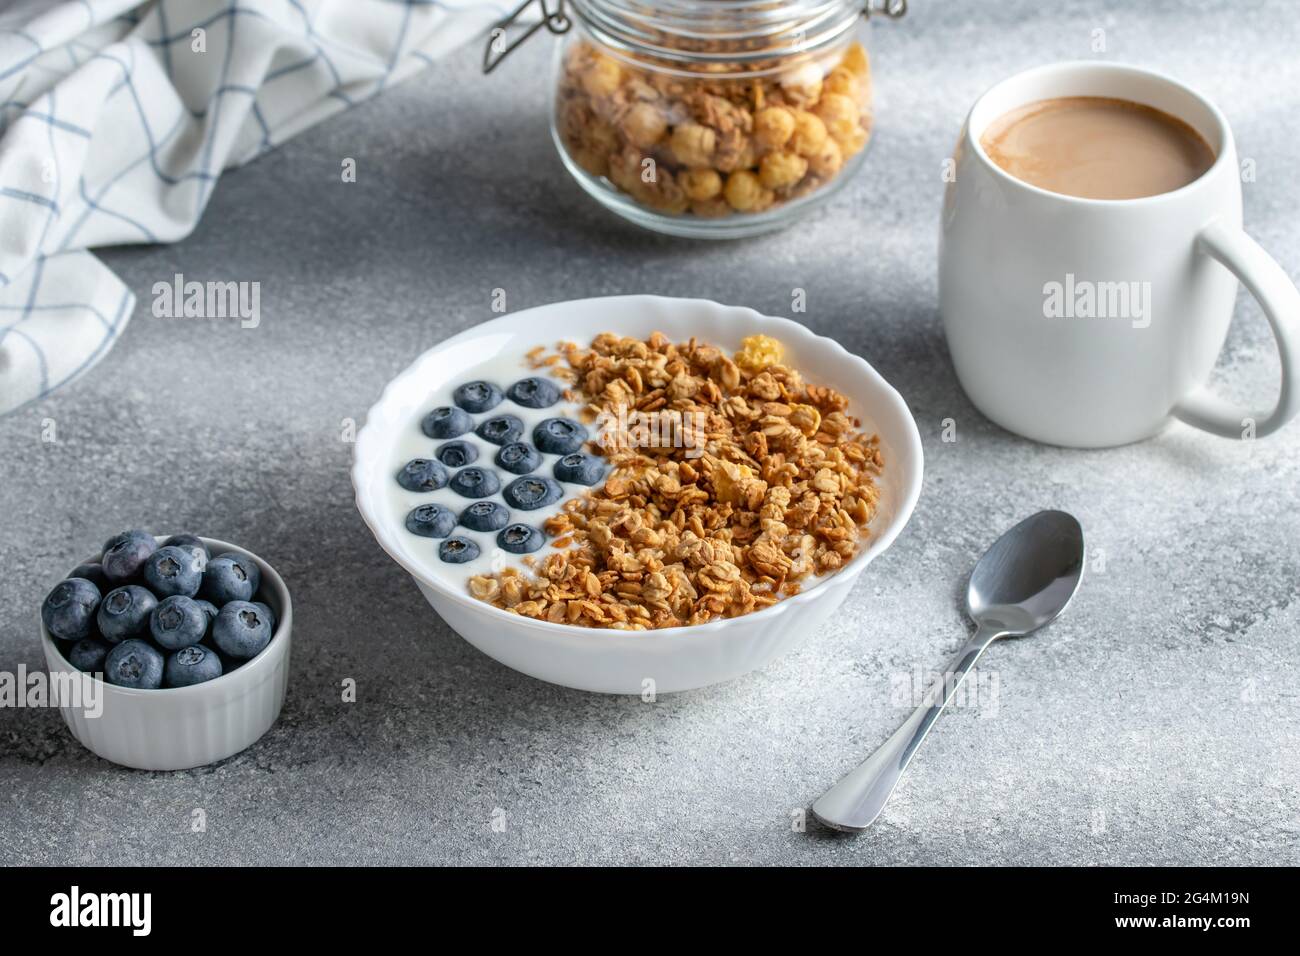 Granola with yogurt and coffee on a gray table. Hot morning drink. Muesli and blueberries in a white bowl. Dry breakfast concept. Healthy vegetarian f Stock Photo